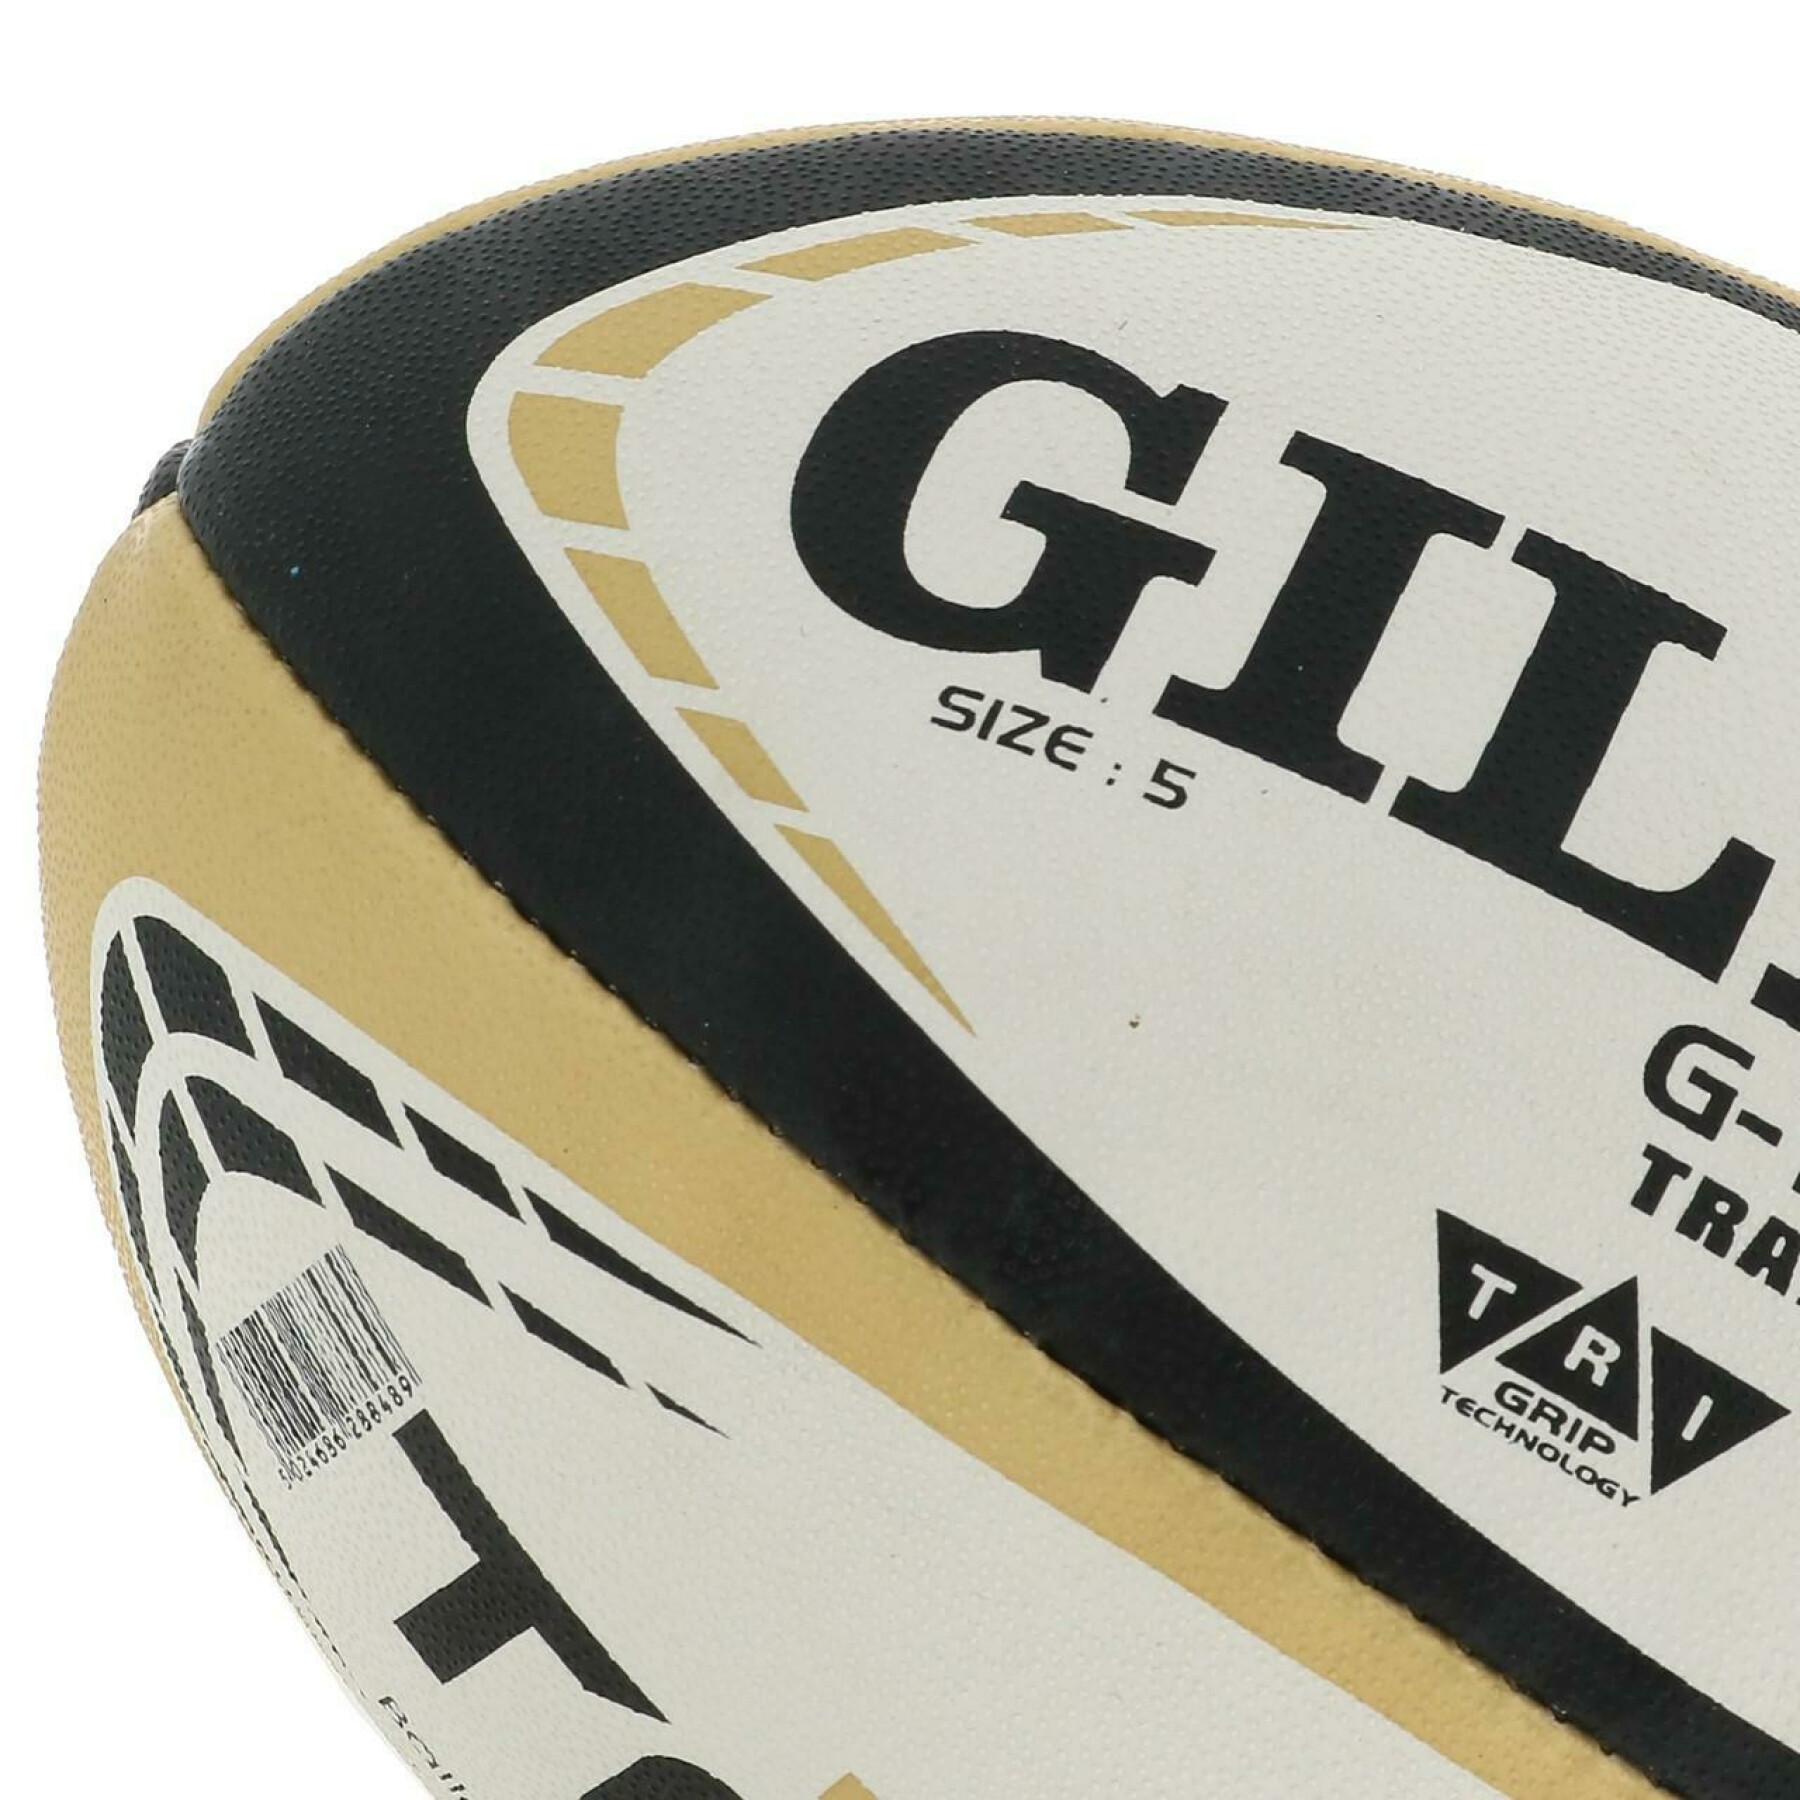 Pallone da rugby Gilbert G-TR4000 Top 14 (taille 5)